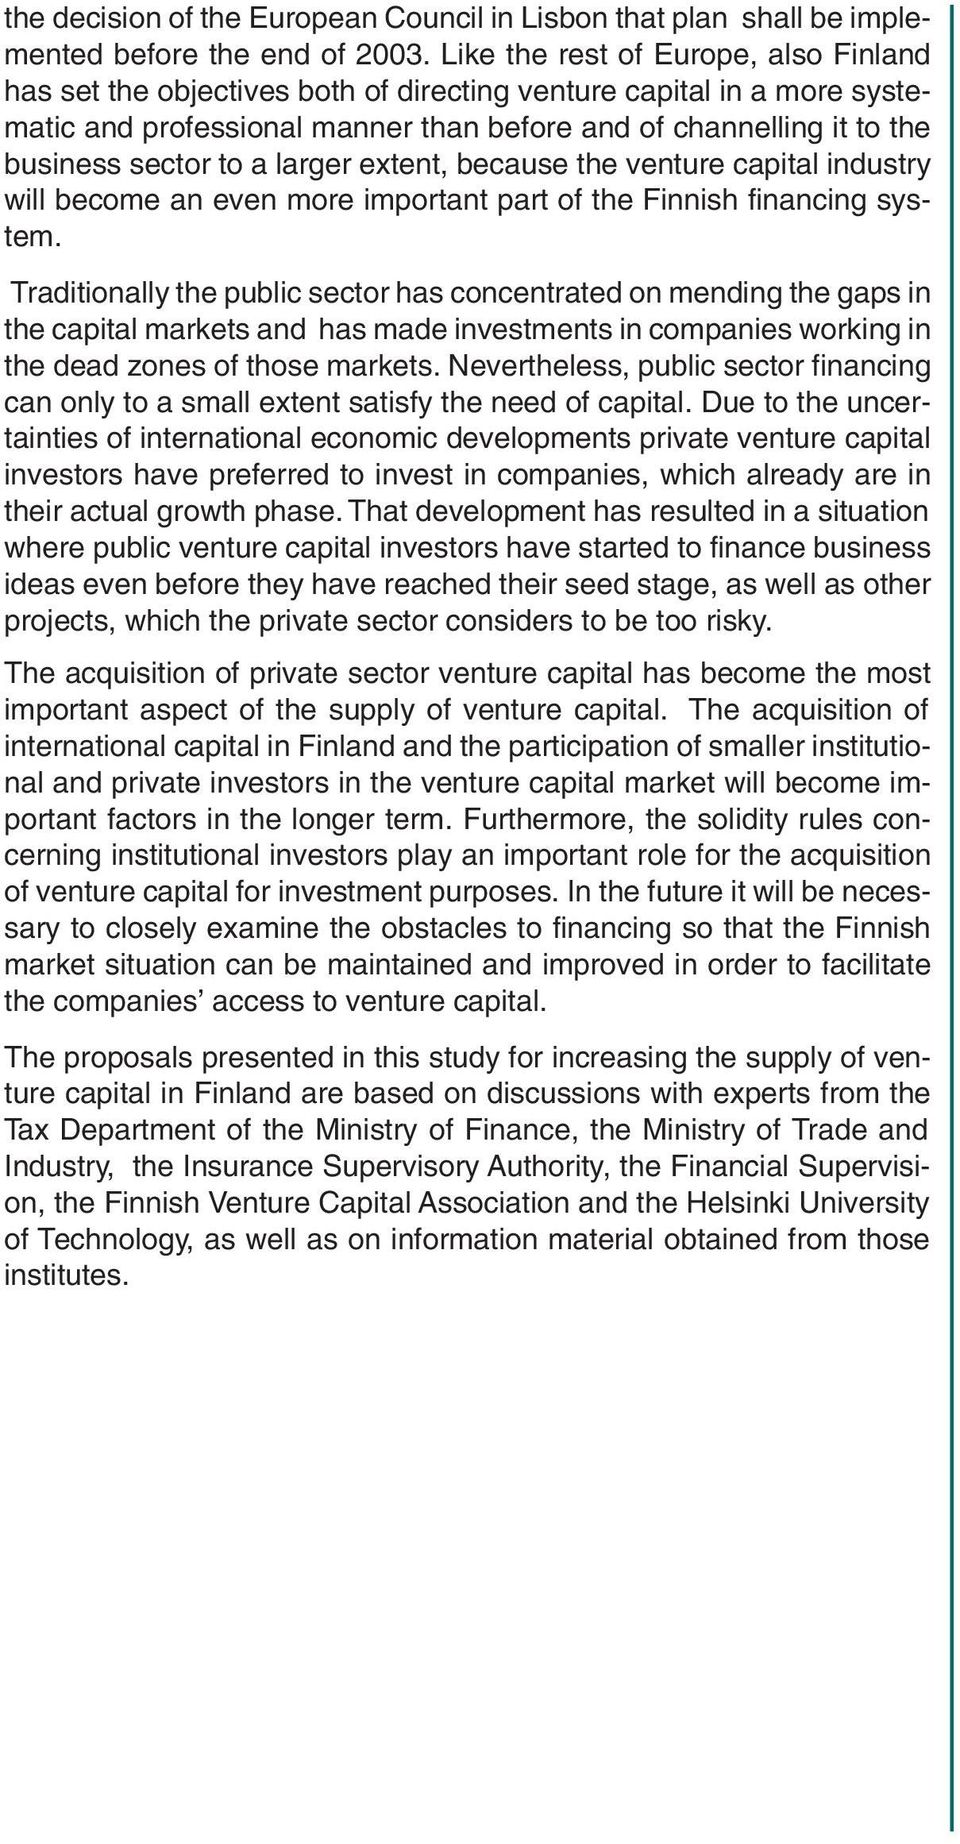 a larger extent, because the venture capital industry will become an even more important part of the Finnish financing system.